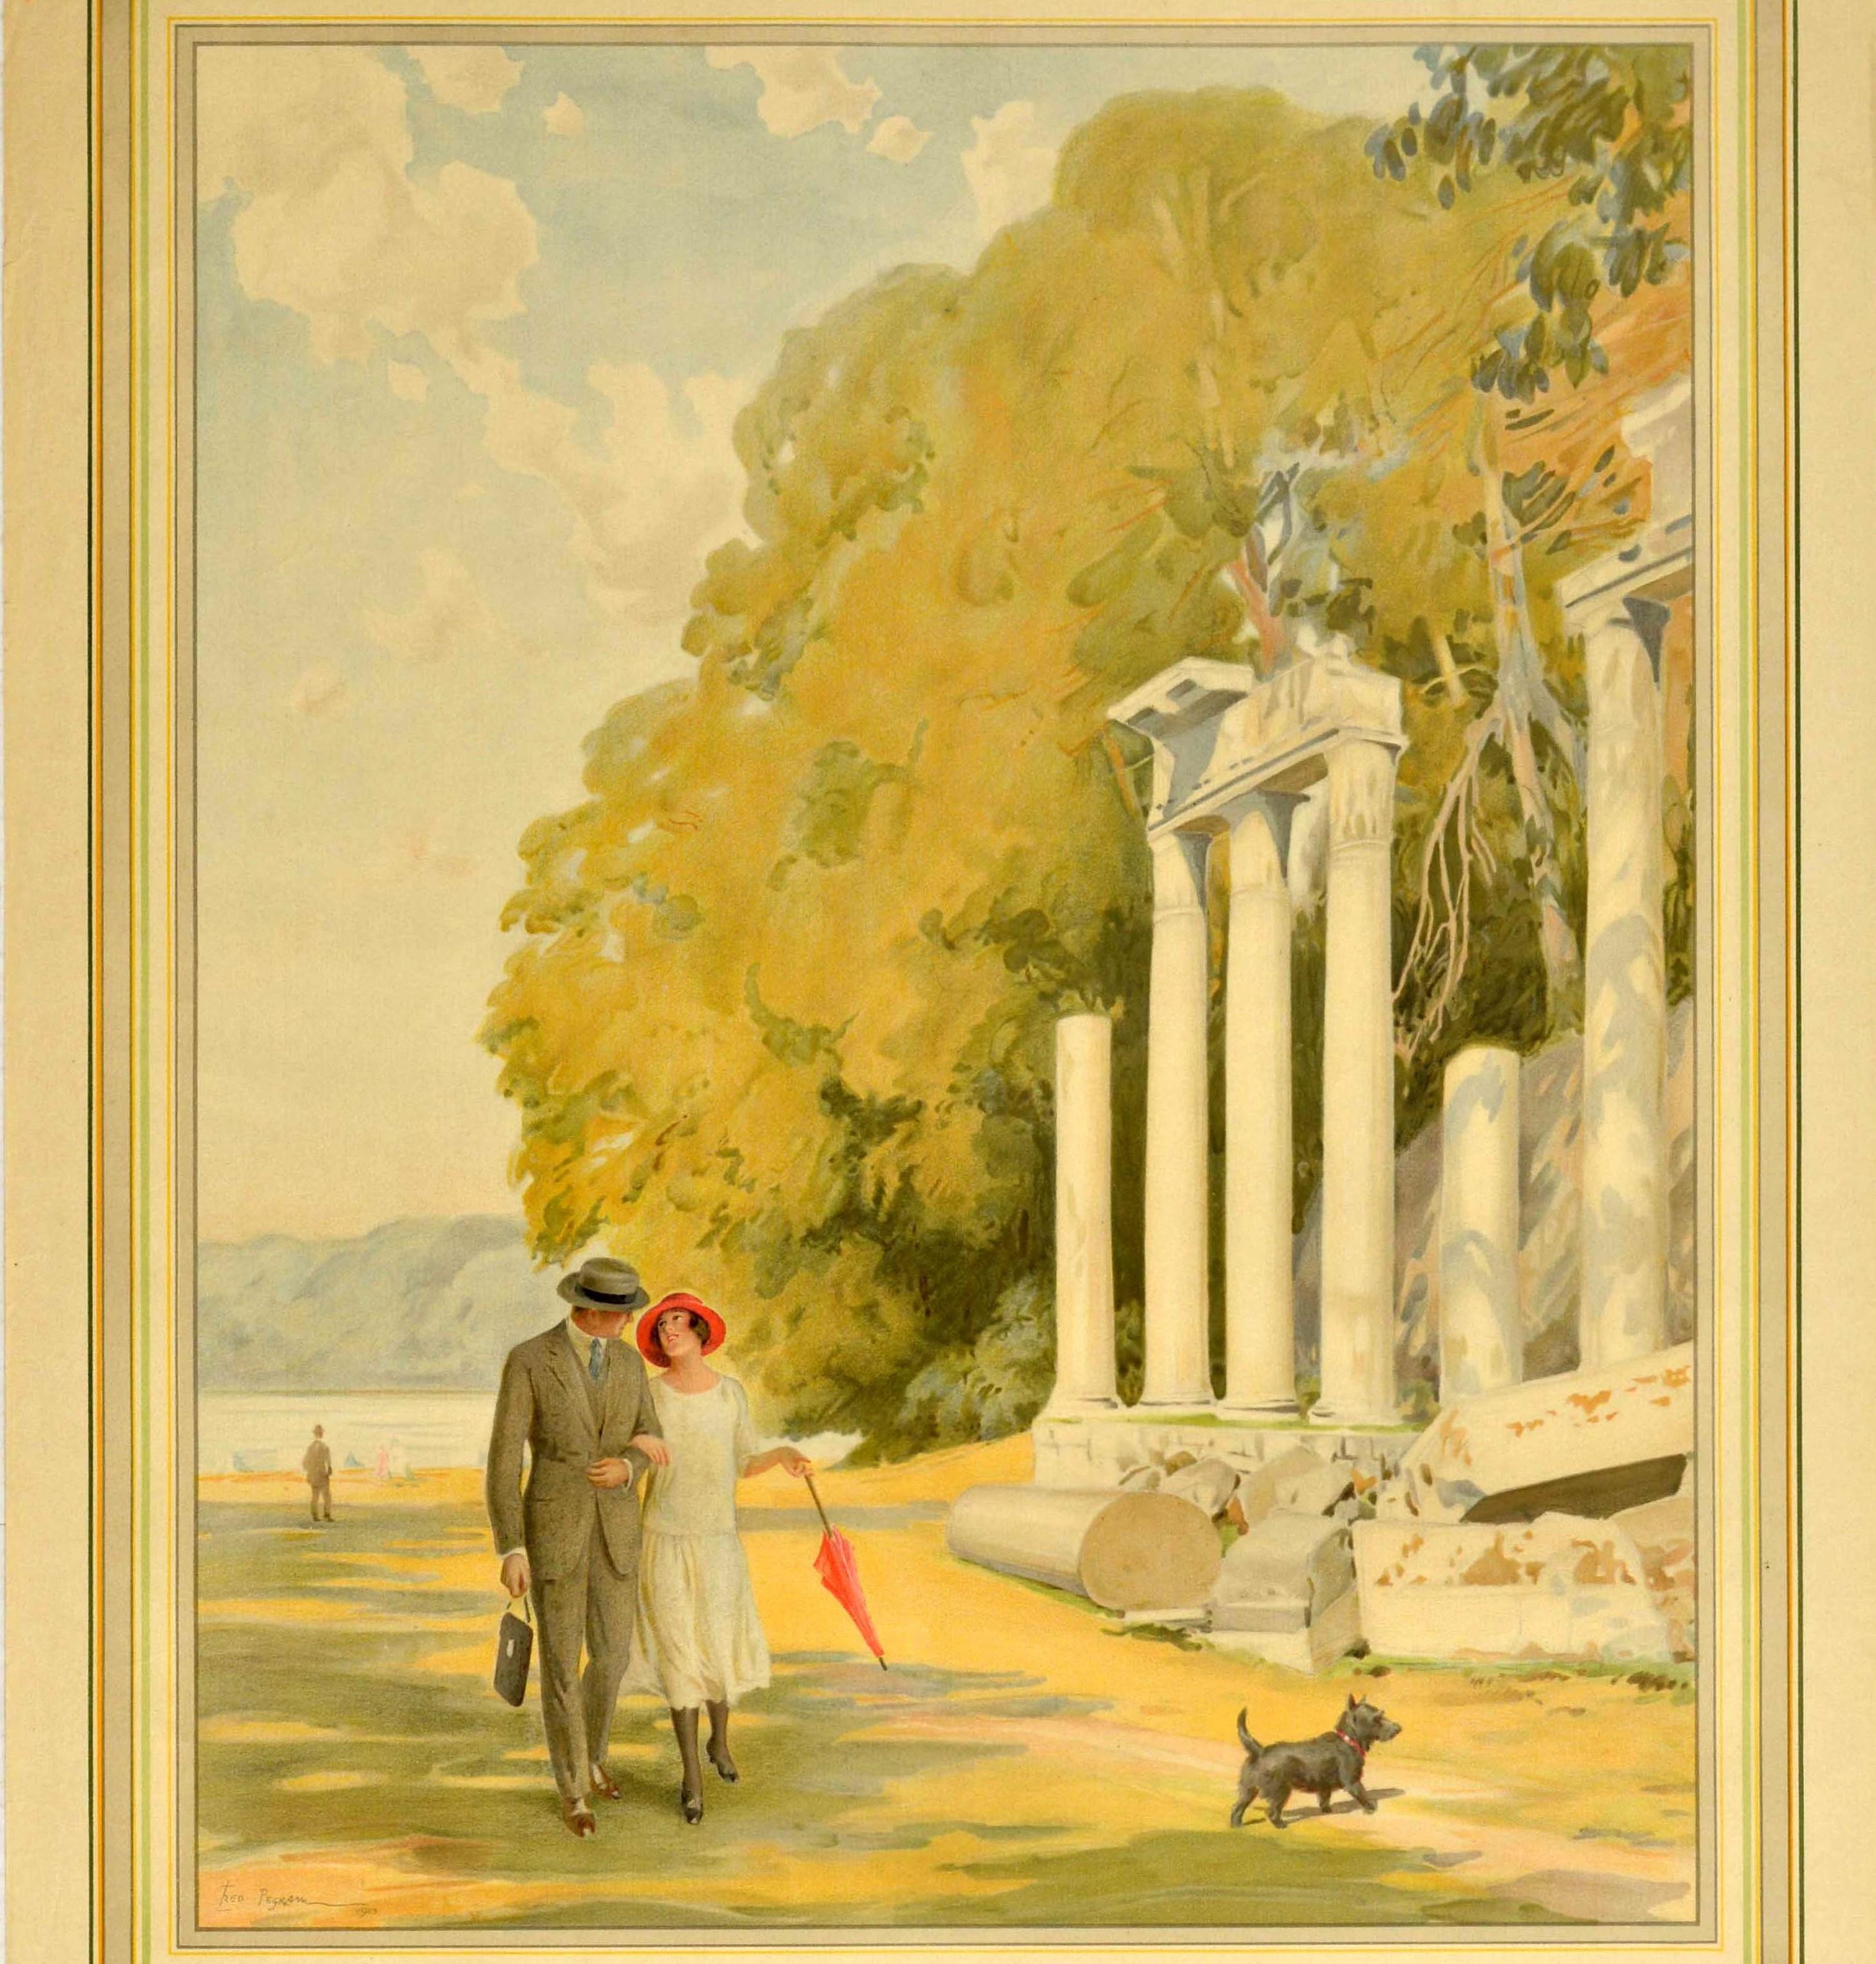 Original vintage London Transport poster for “Virginia Water” by Motor Bus General Route 117A from Hounslow Town Station featuring a stunning painting by the British artist Fred Pegram (Frederick Pegram; 1870-1937) of a couple walking arm-in-arm